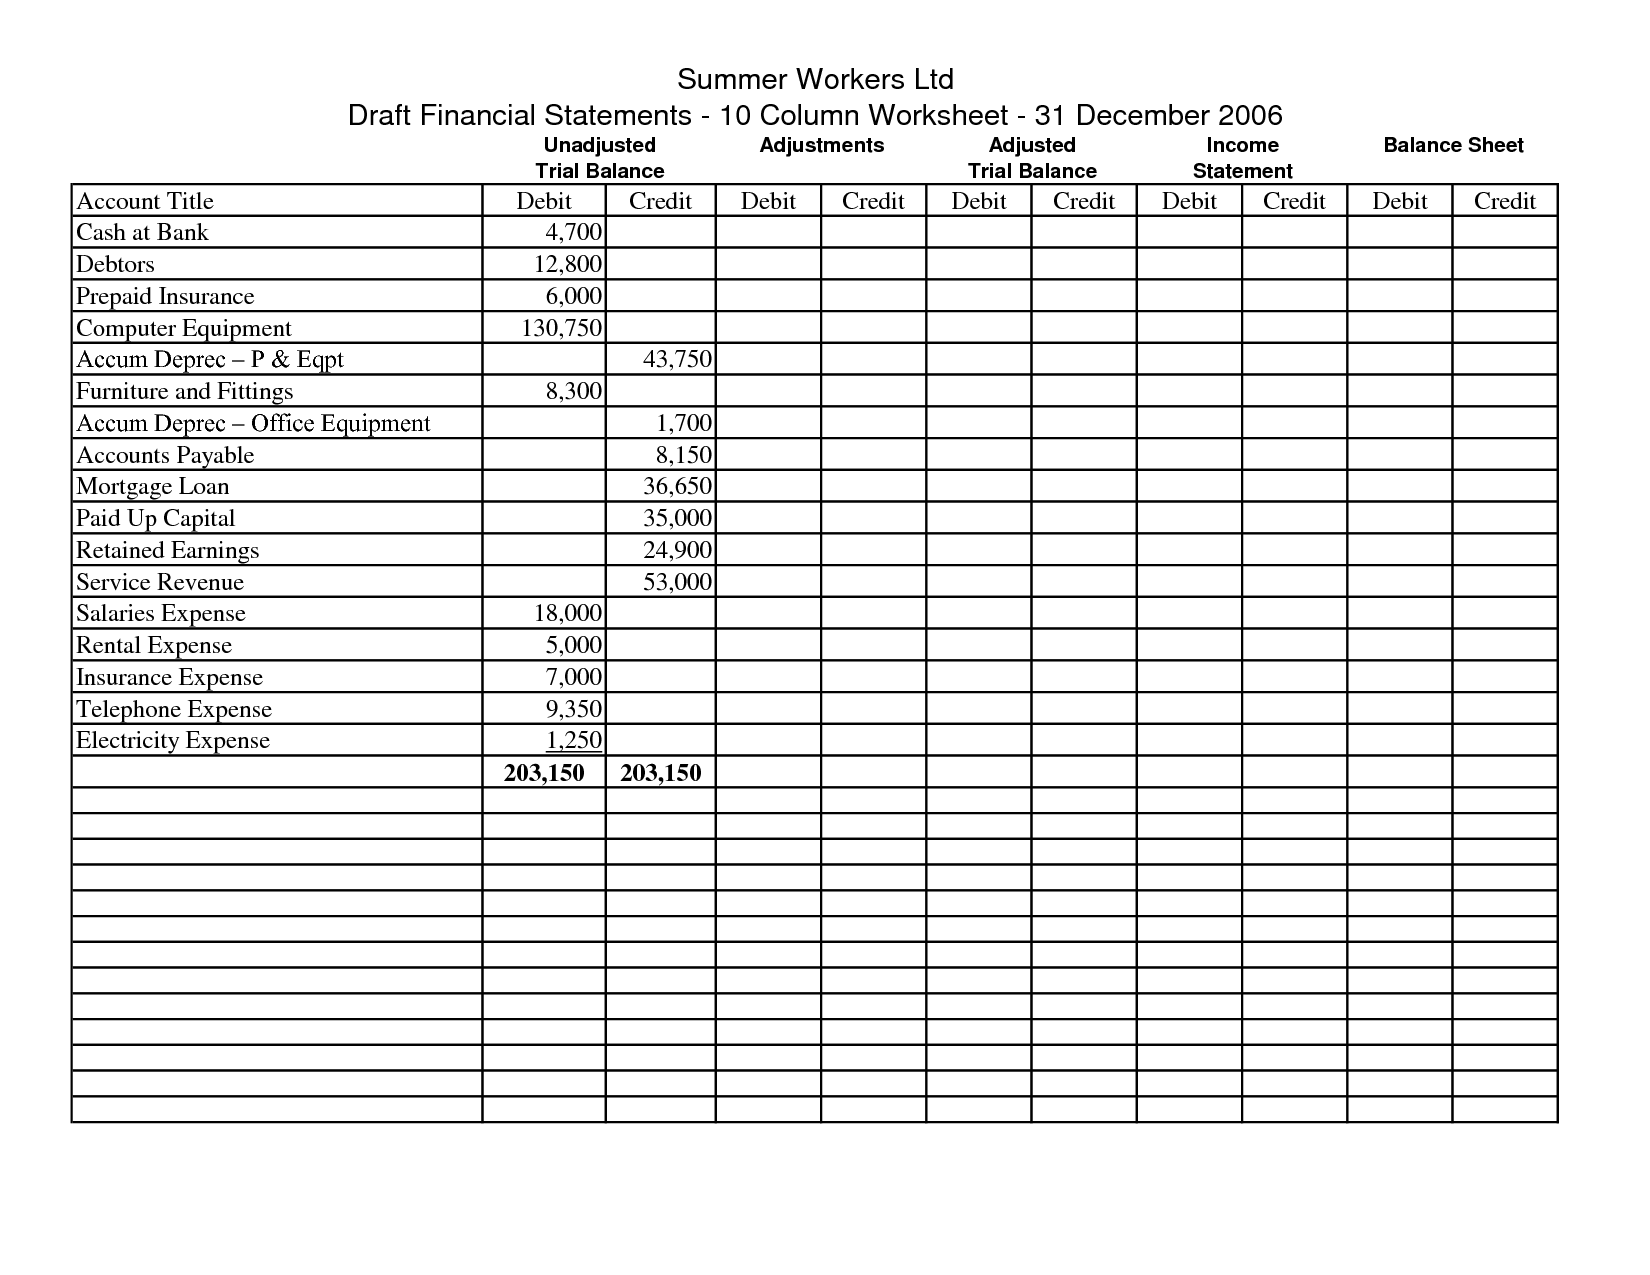 15-best-images-of-blank-accounting-worksheets-blank-10-column